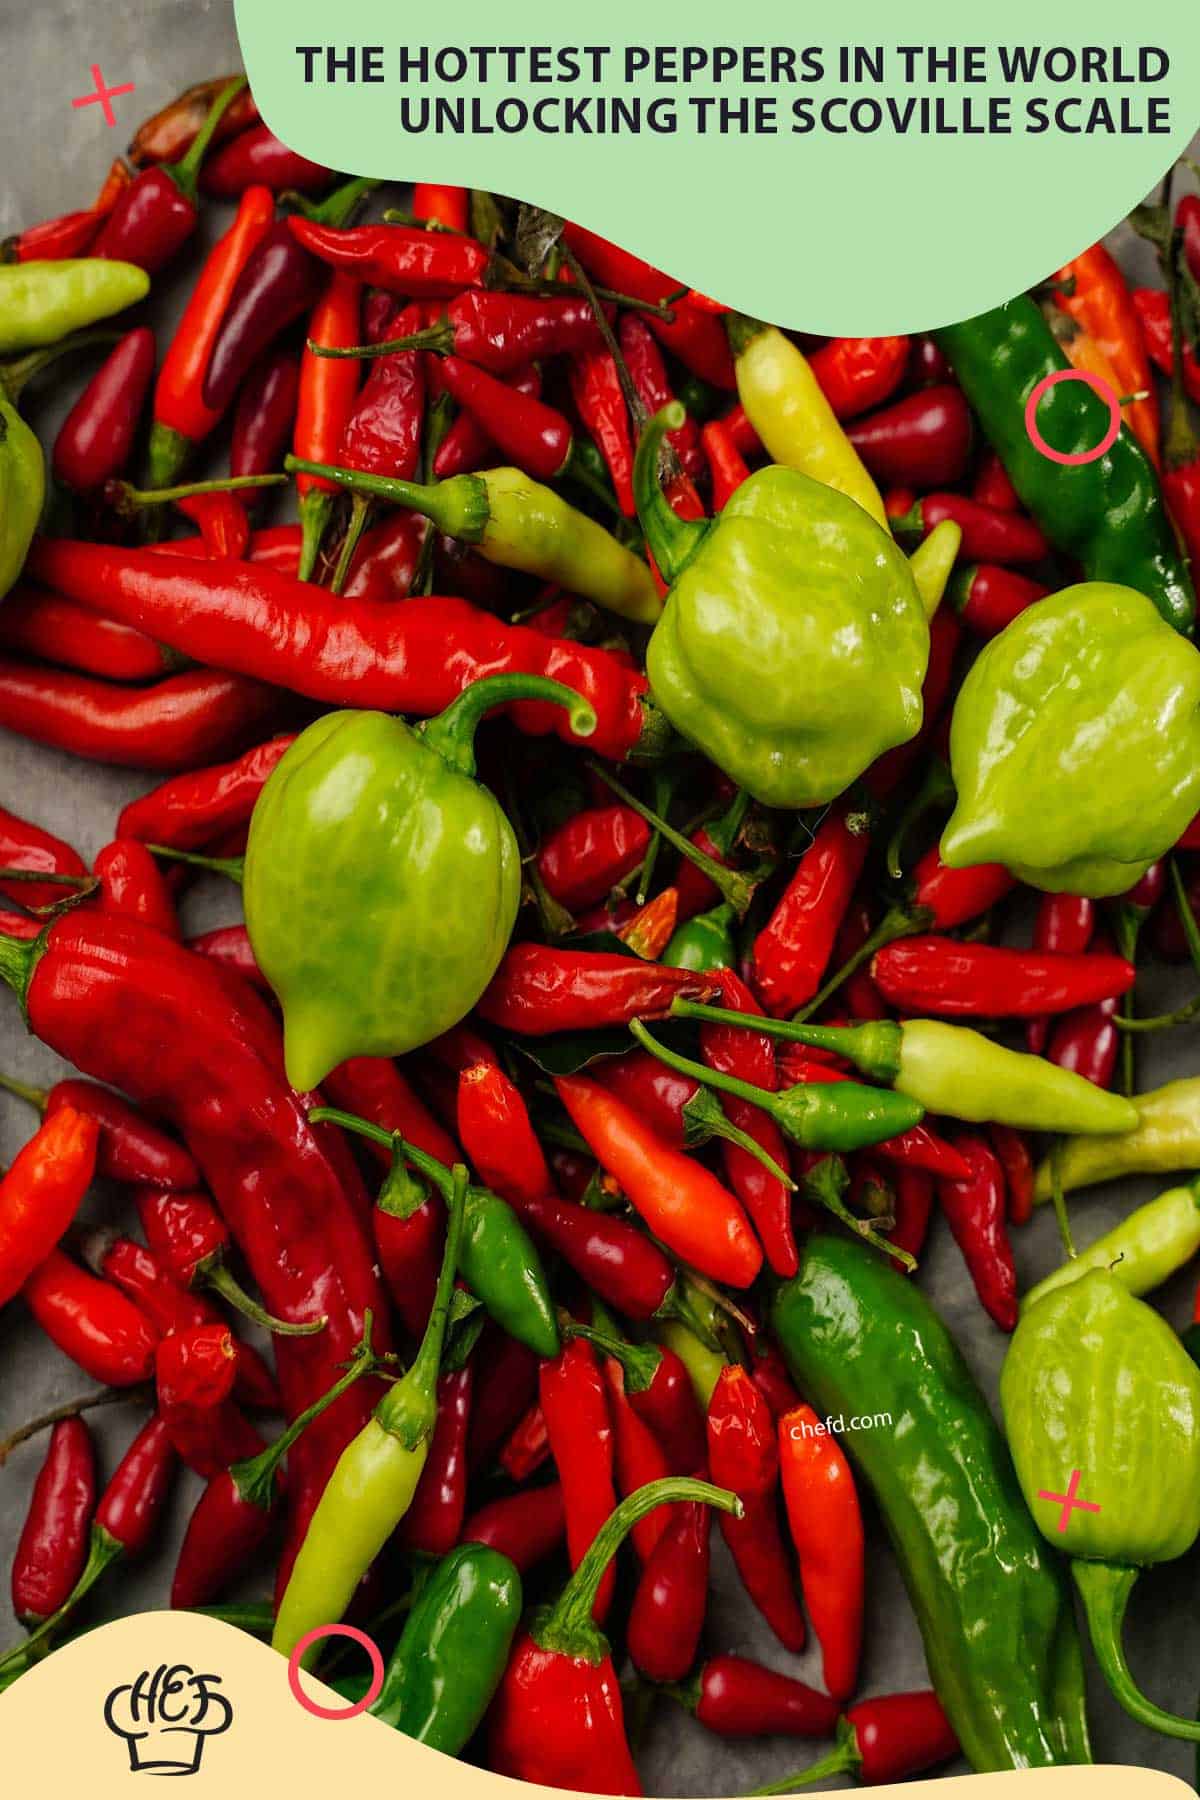 The Hottest Peppers in the World